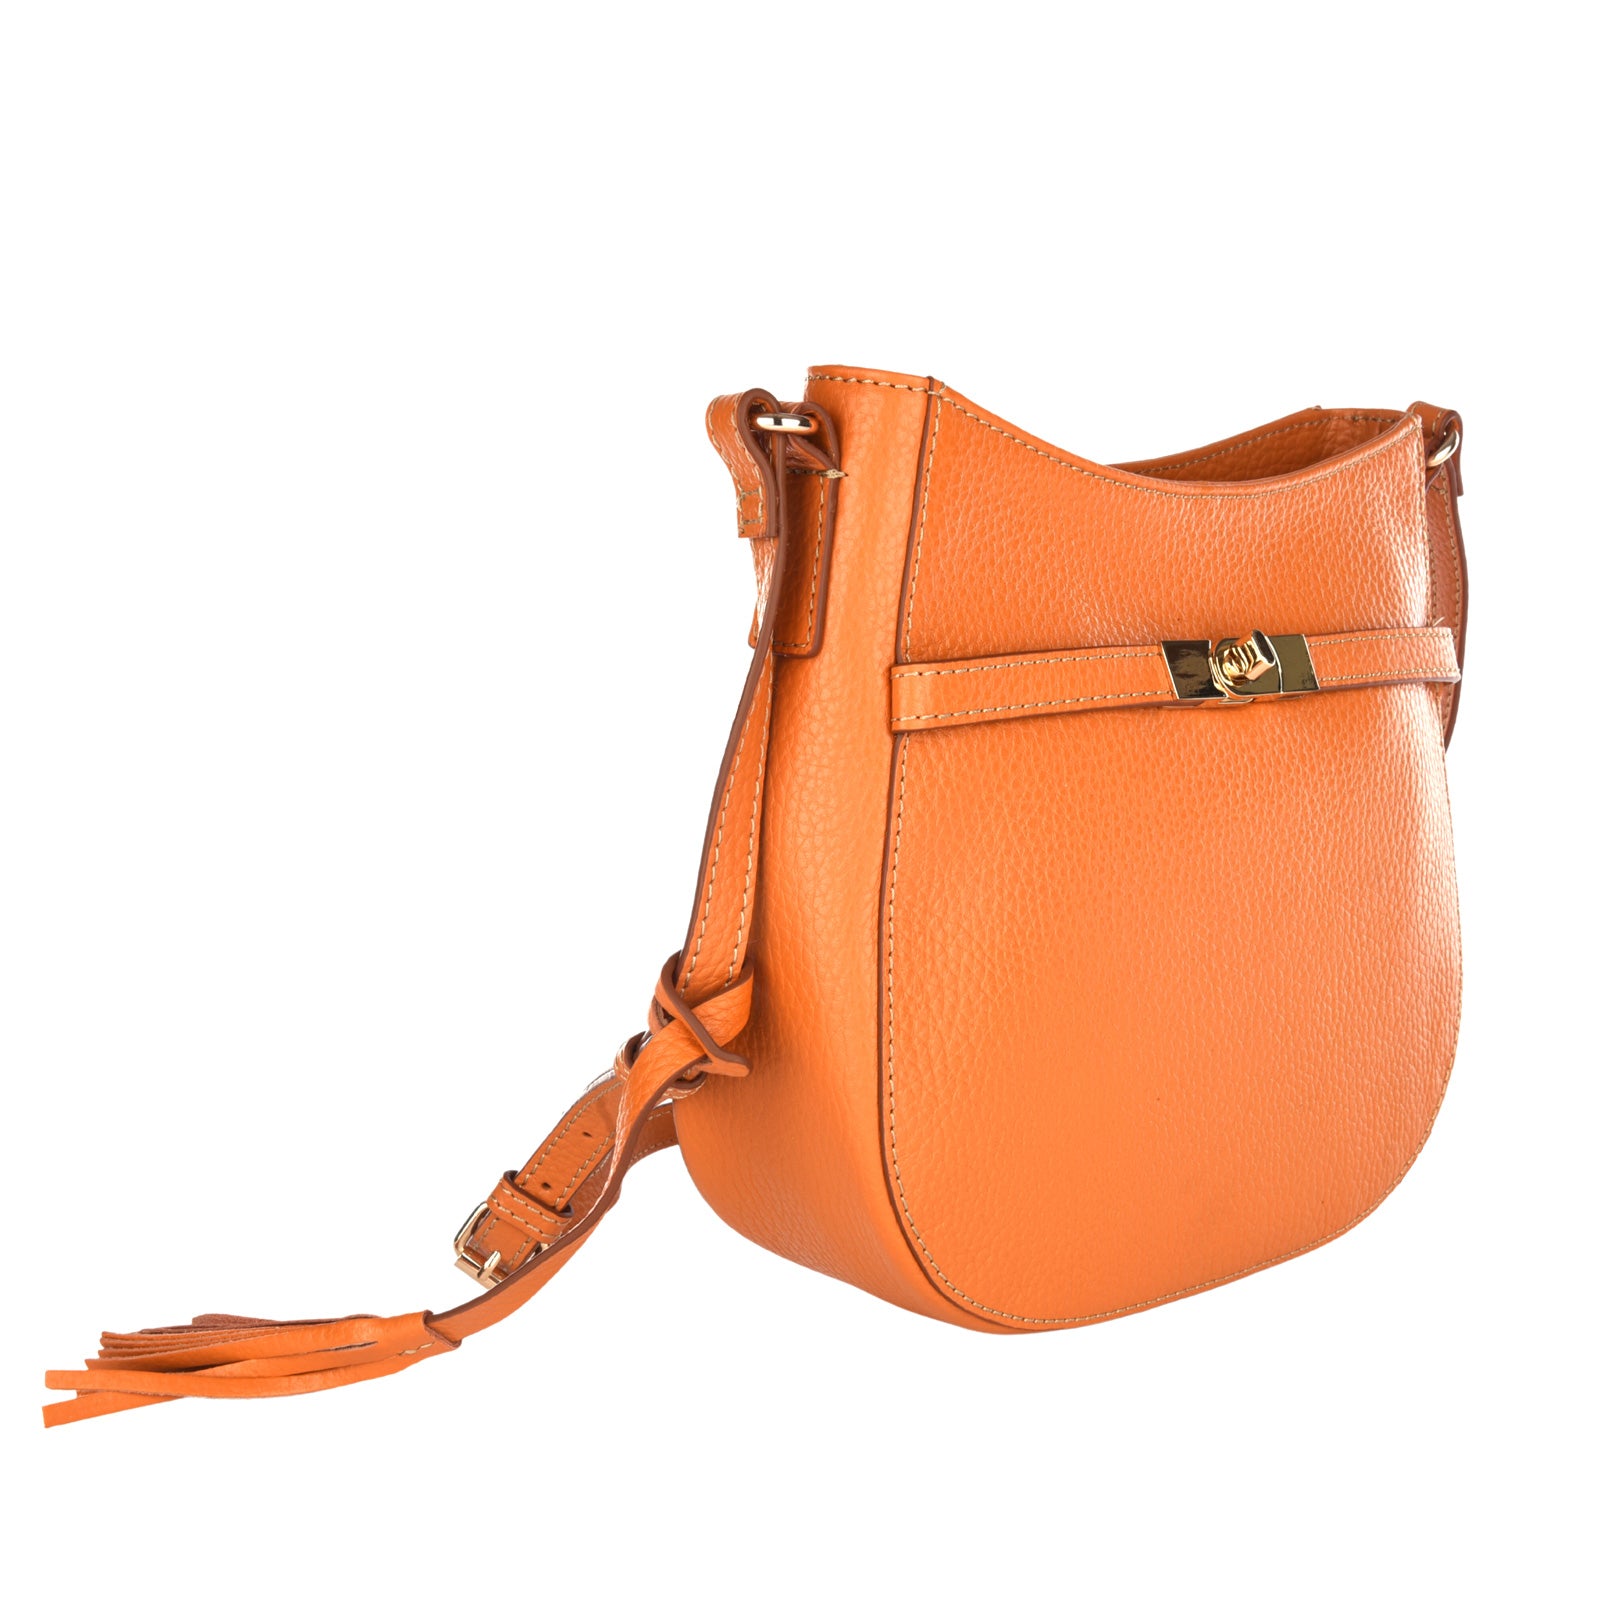 MAUD - Crossover bag in grained leather